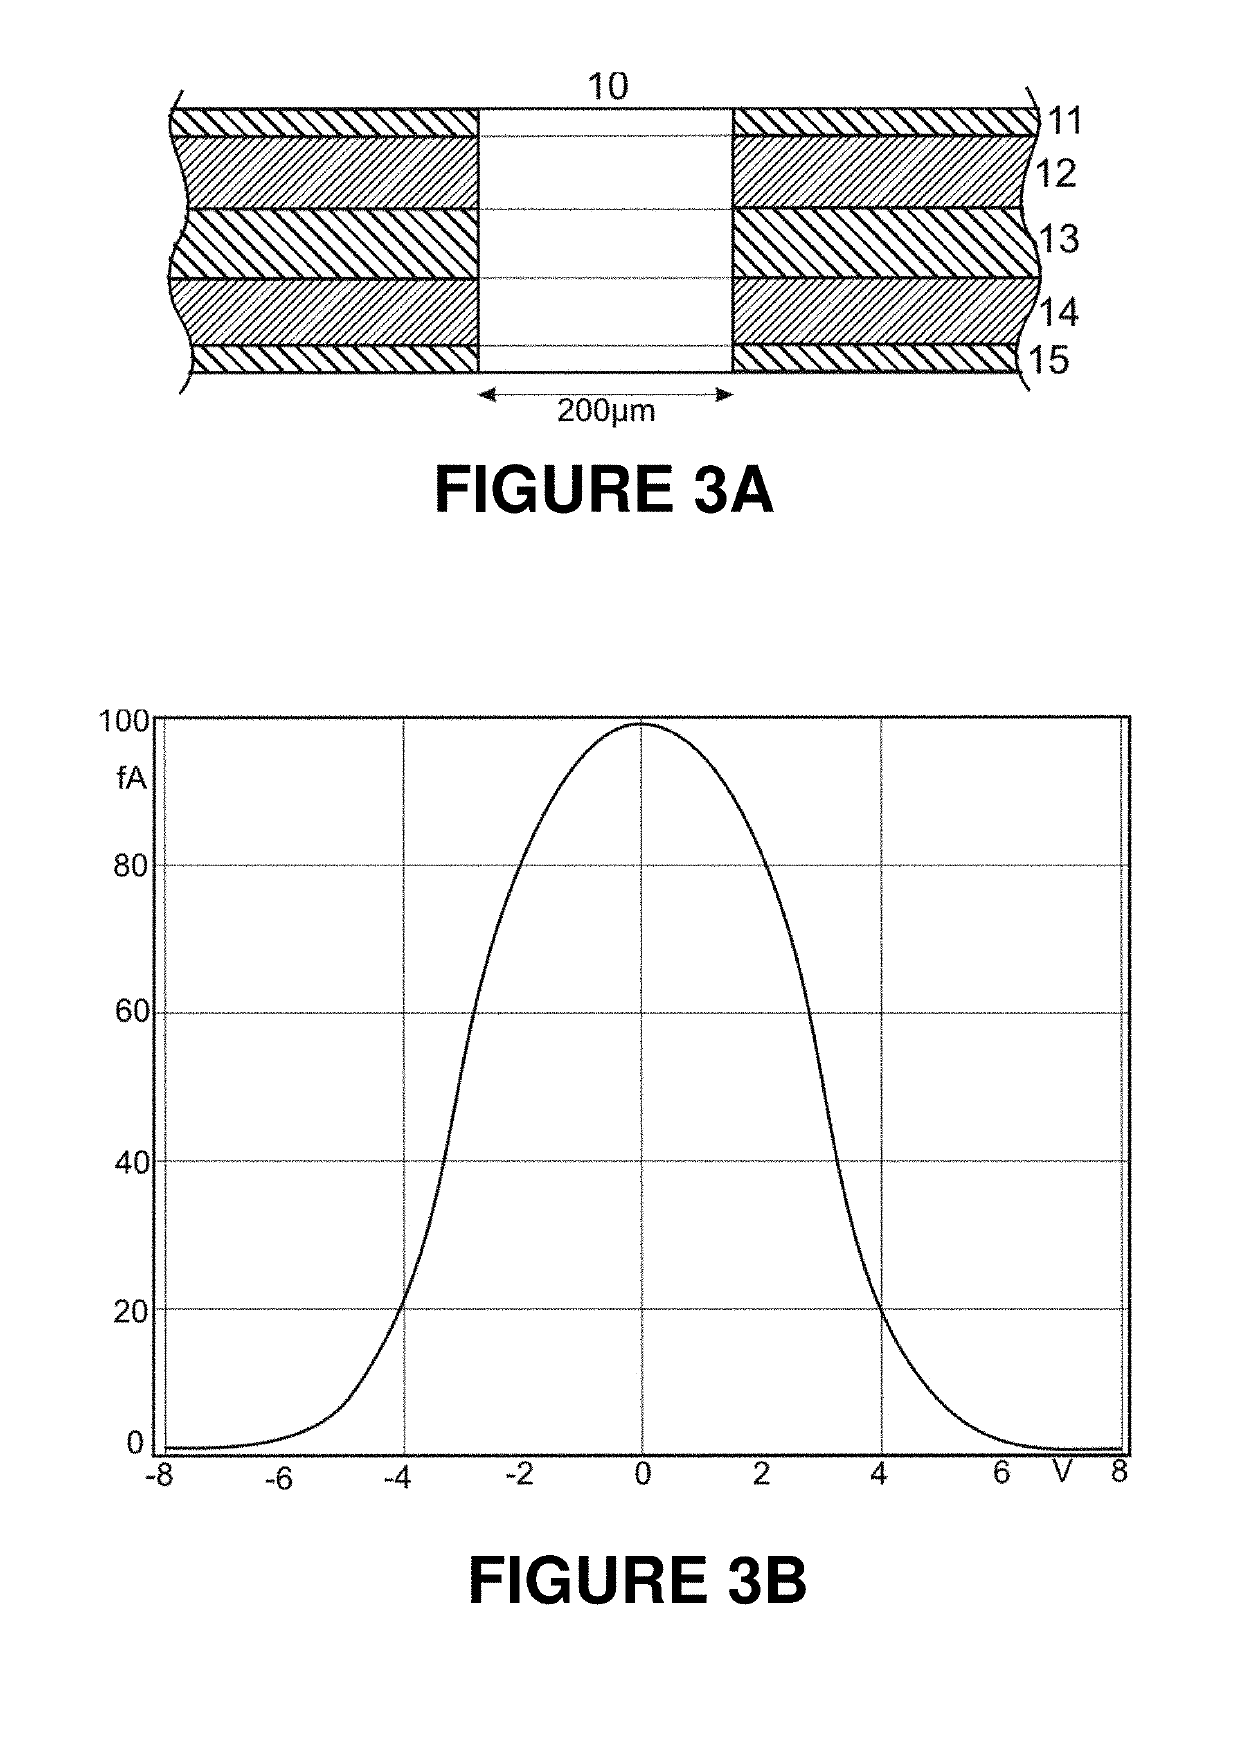 Gating element in ion mobility spectrometers